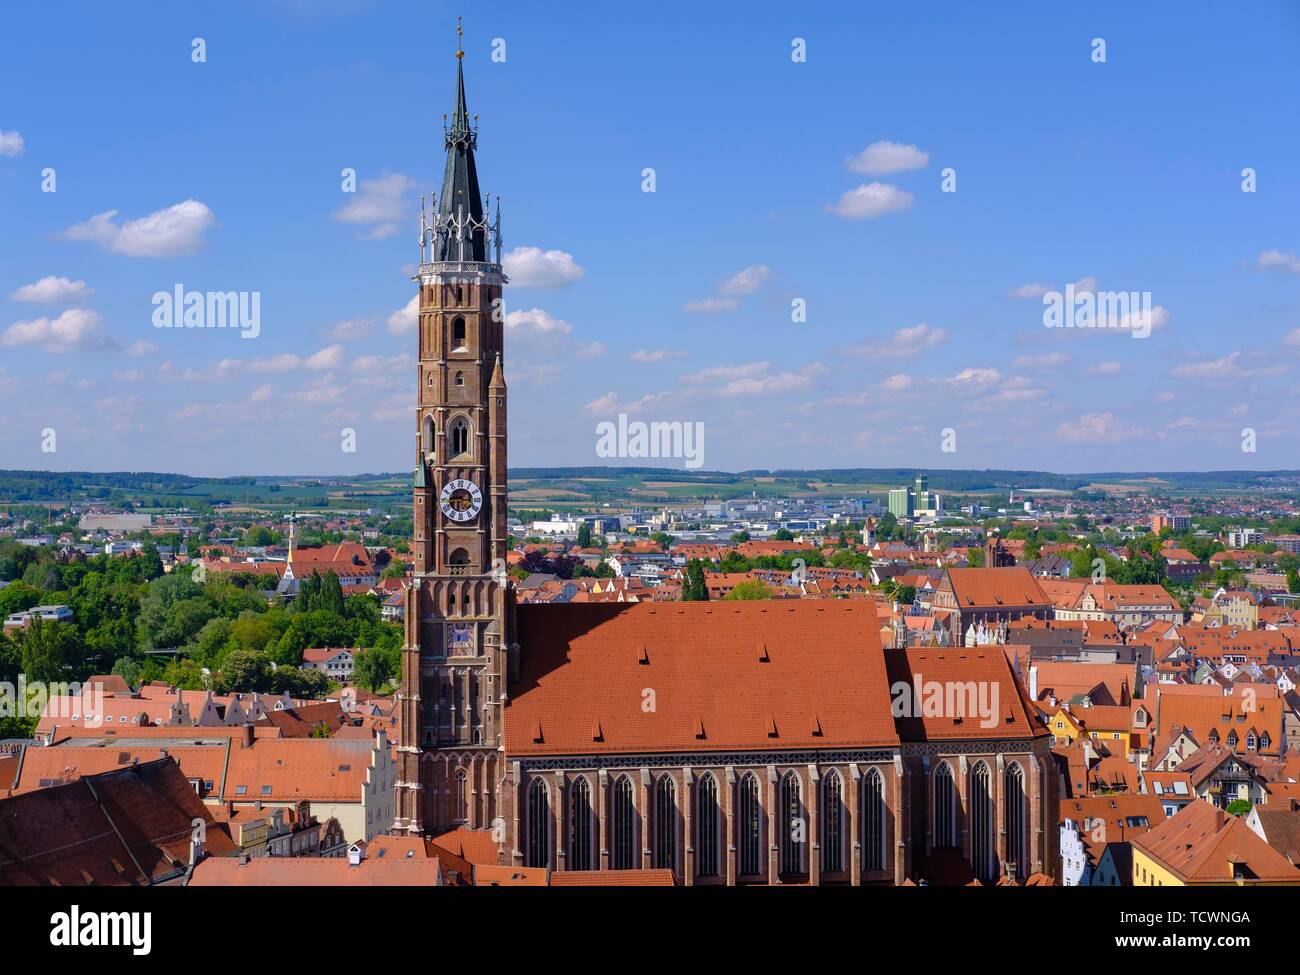 St. Martin's Church and old town, view from castle Trausnitz, Landshut, Lower Bavaria, Bavaria, Germany Stock Photo